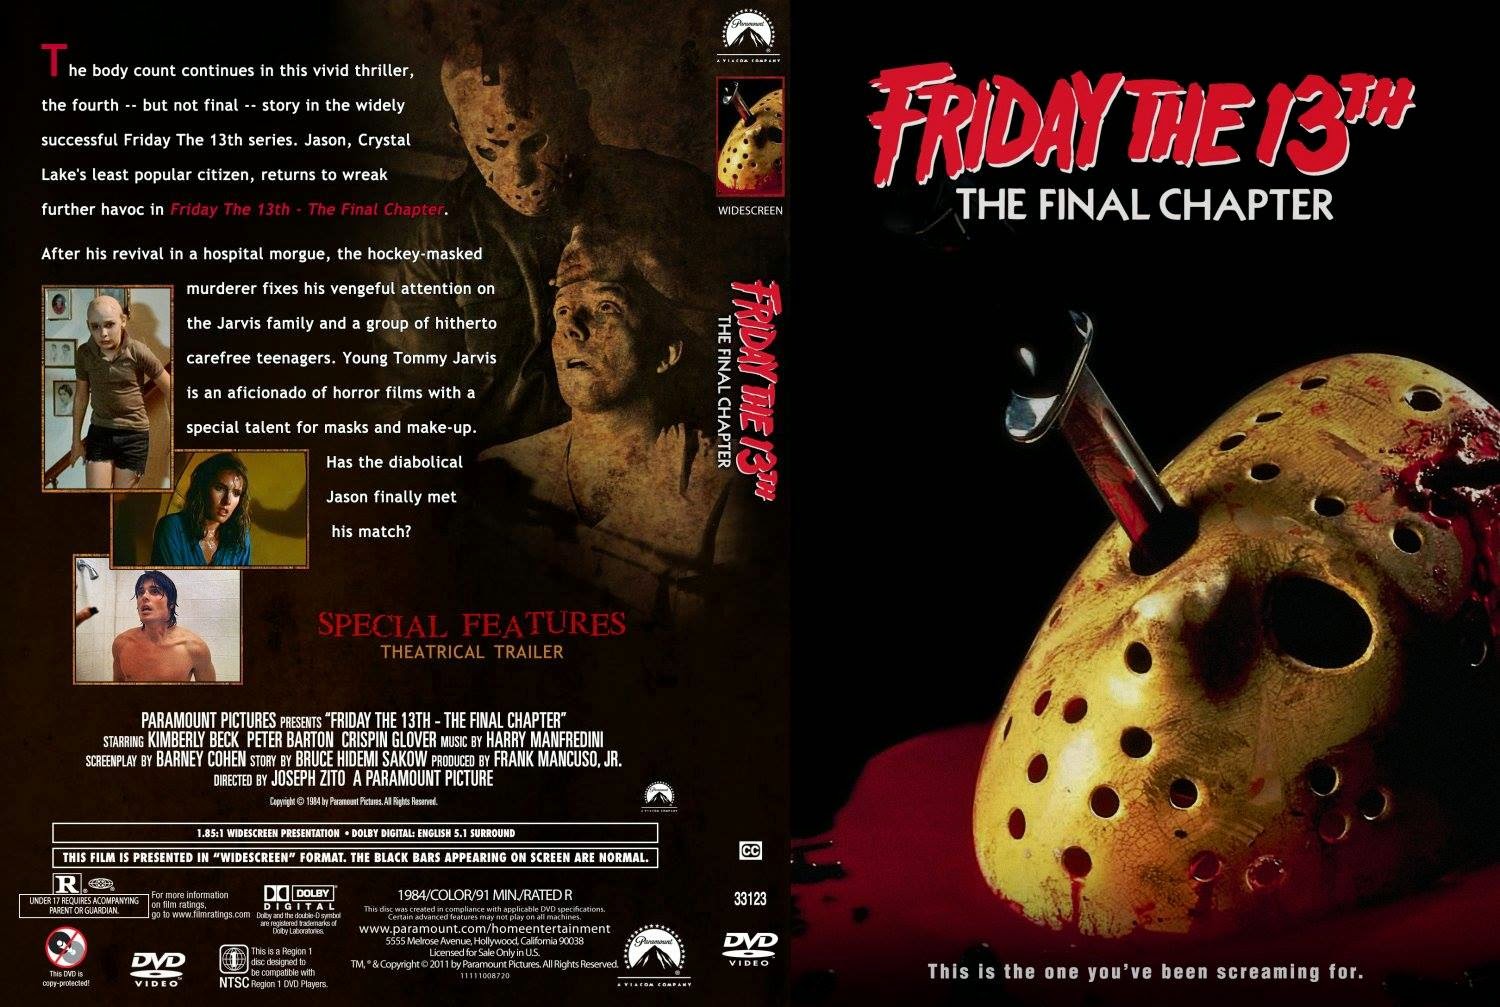 Celebrate The 30th Anniversary Of 'Friday The 13th: The Final Chapter' Tonight!